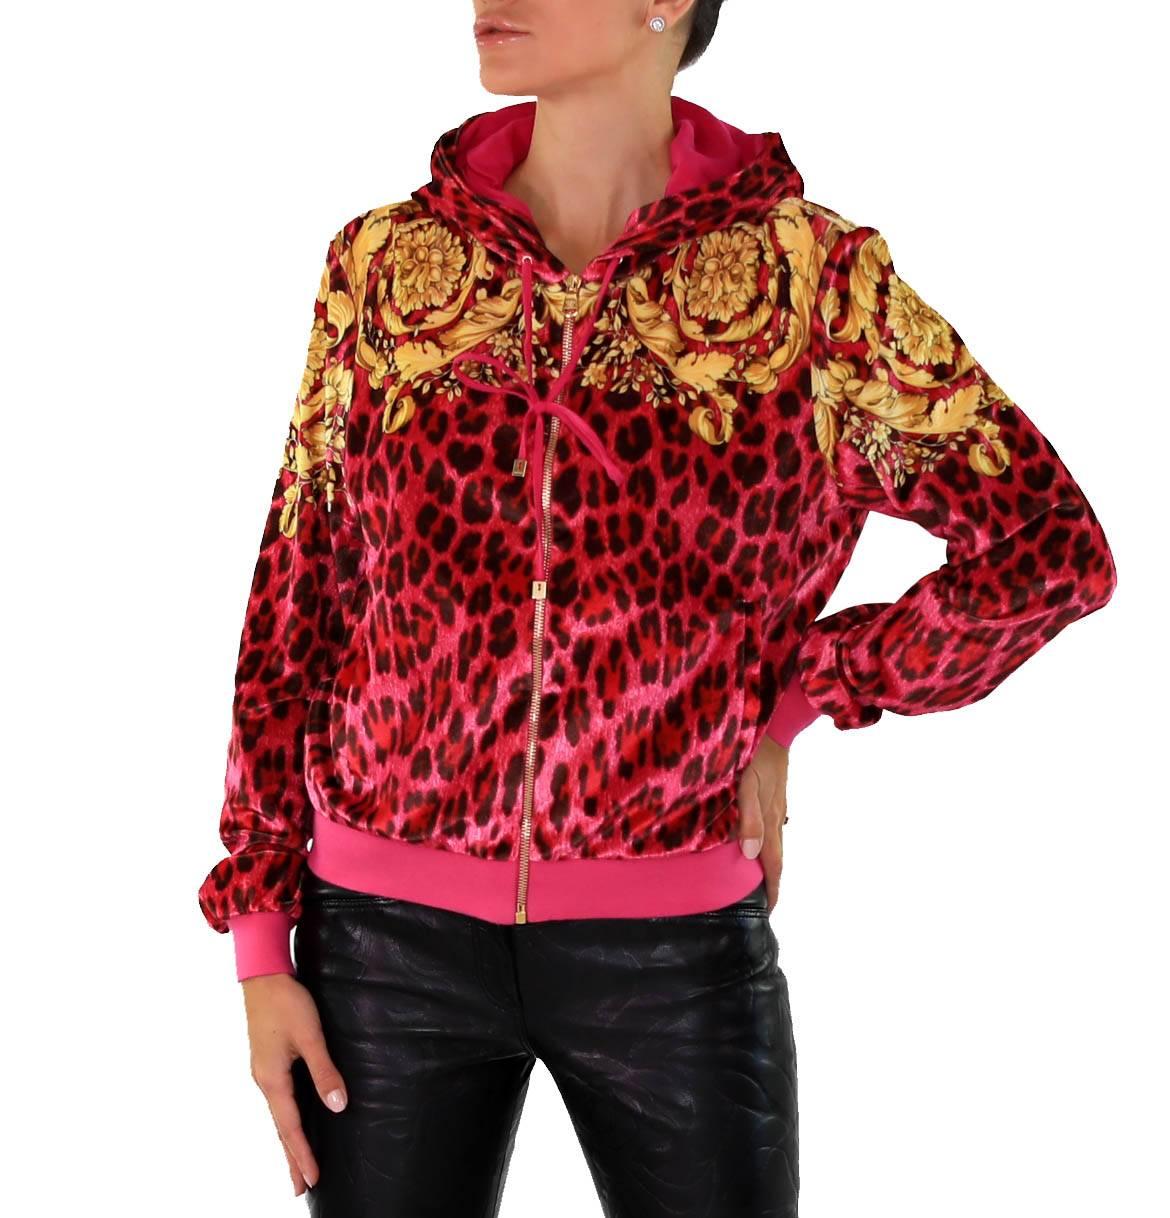  BRAND NEW 

Versace Barocco Animalier Velvet Jacket

Hood
Front zip closure
Long sleeves with banded cuffs
2 front slit pockets
 Allover print with solid contrast trim
Lined
Banded hem

Fiber Content
Shell: 92% polyester, 8% elastane
Lining: 100%